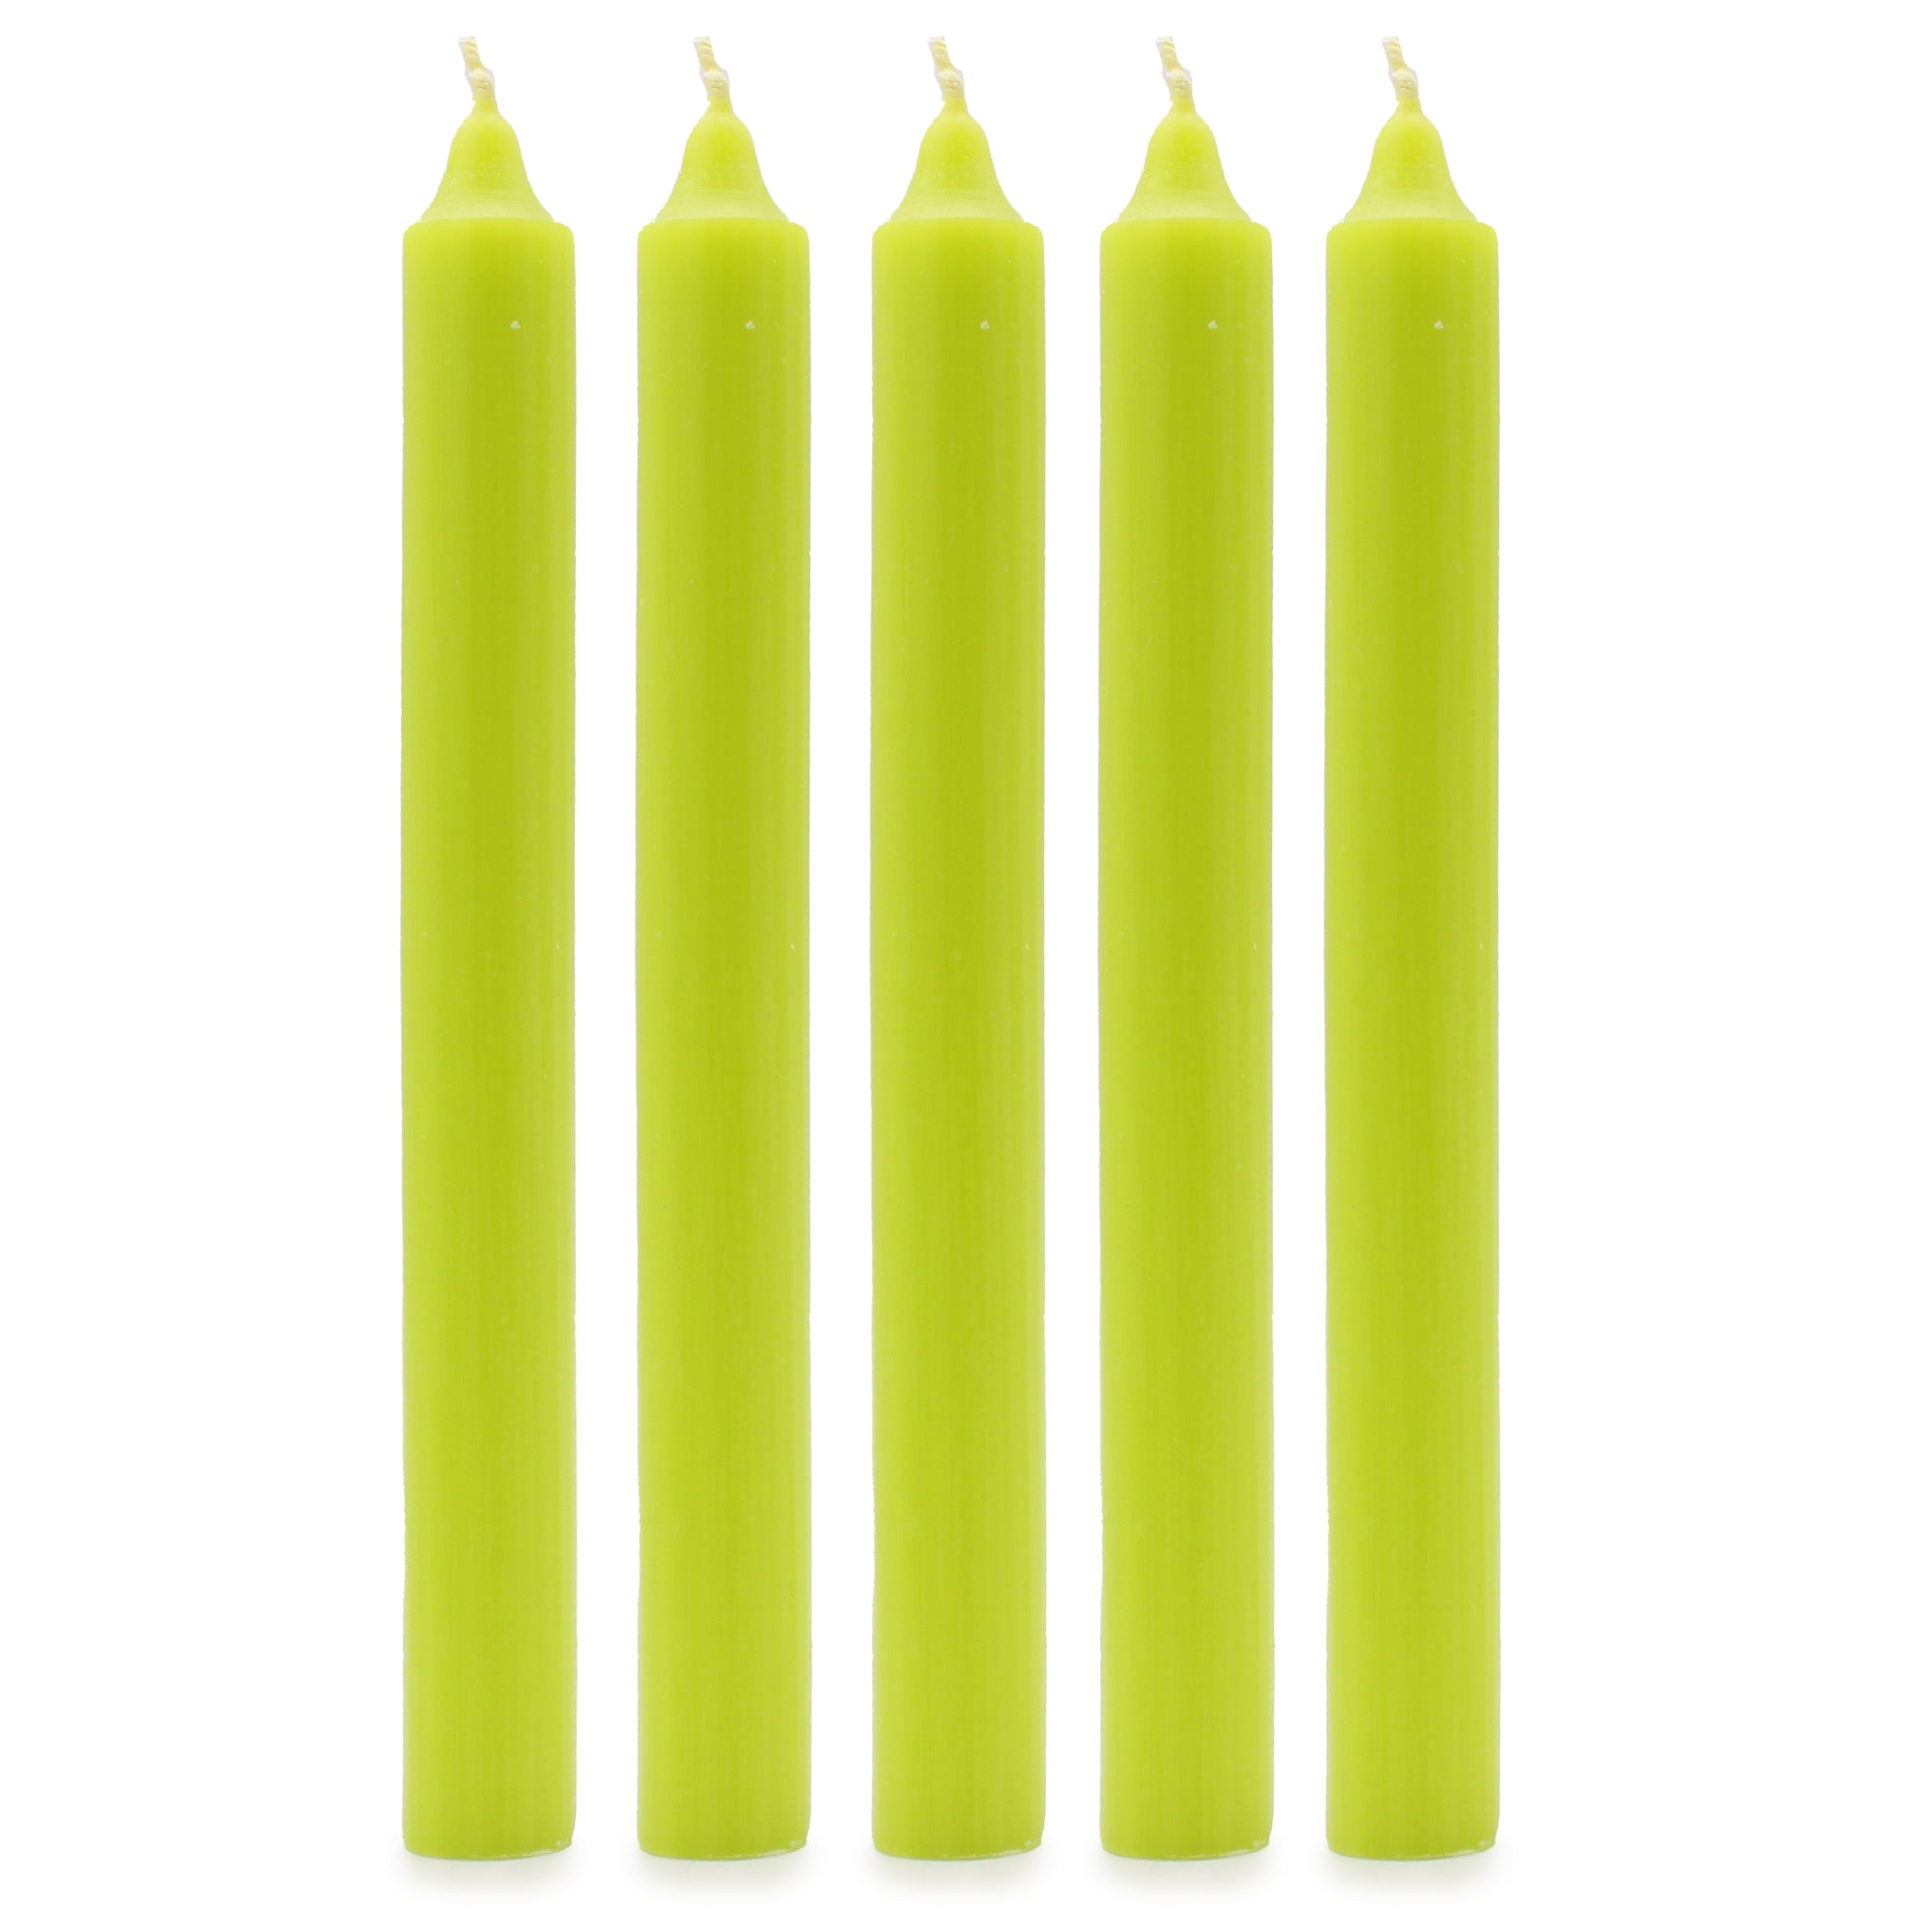 View Solid Colour Dinner Candles Rustic Lime Green Pack of 5 information